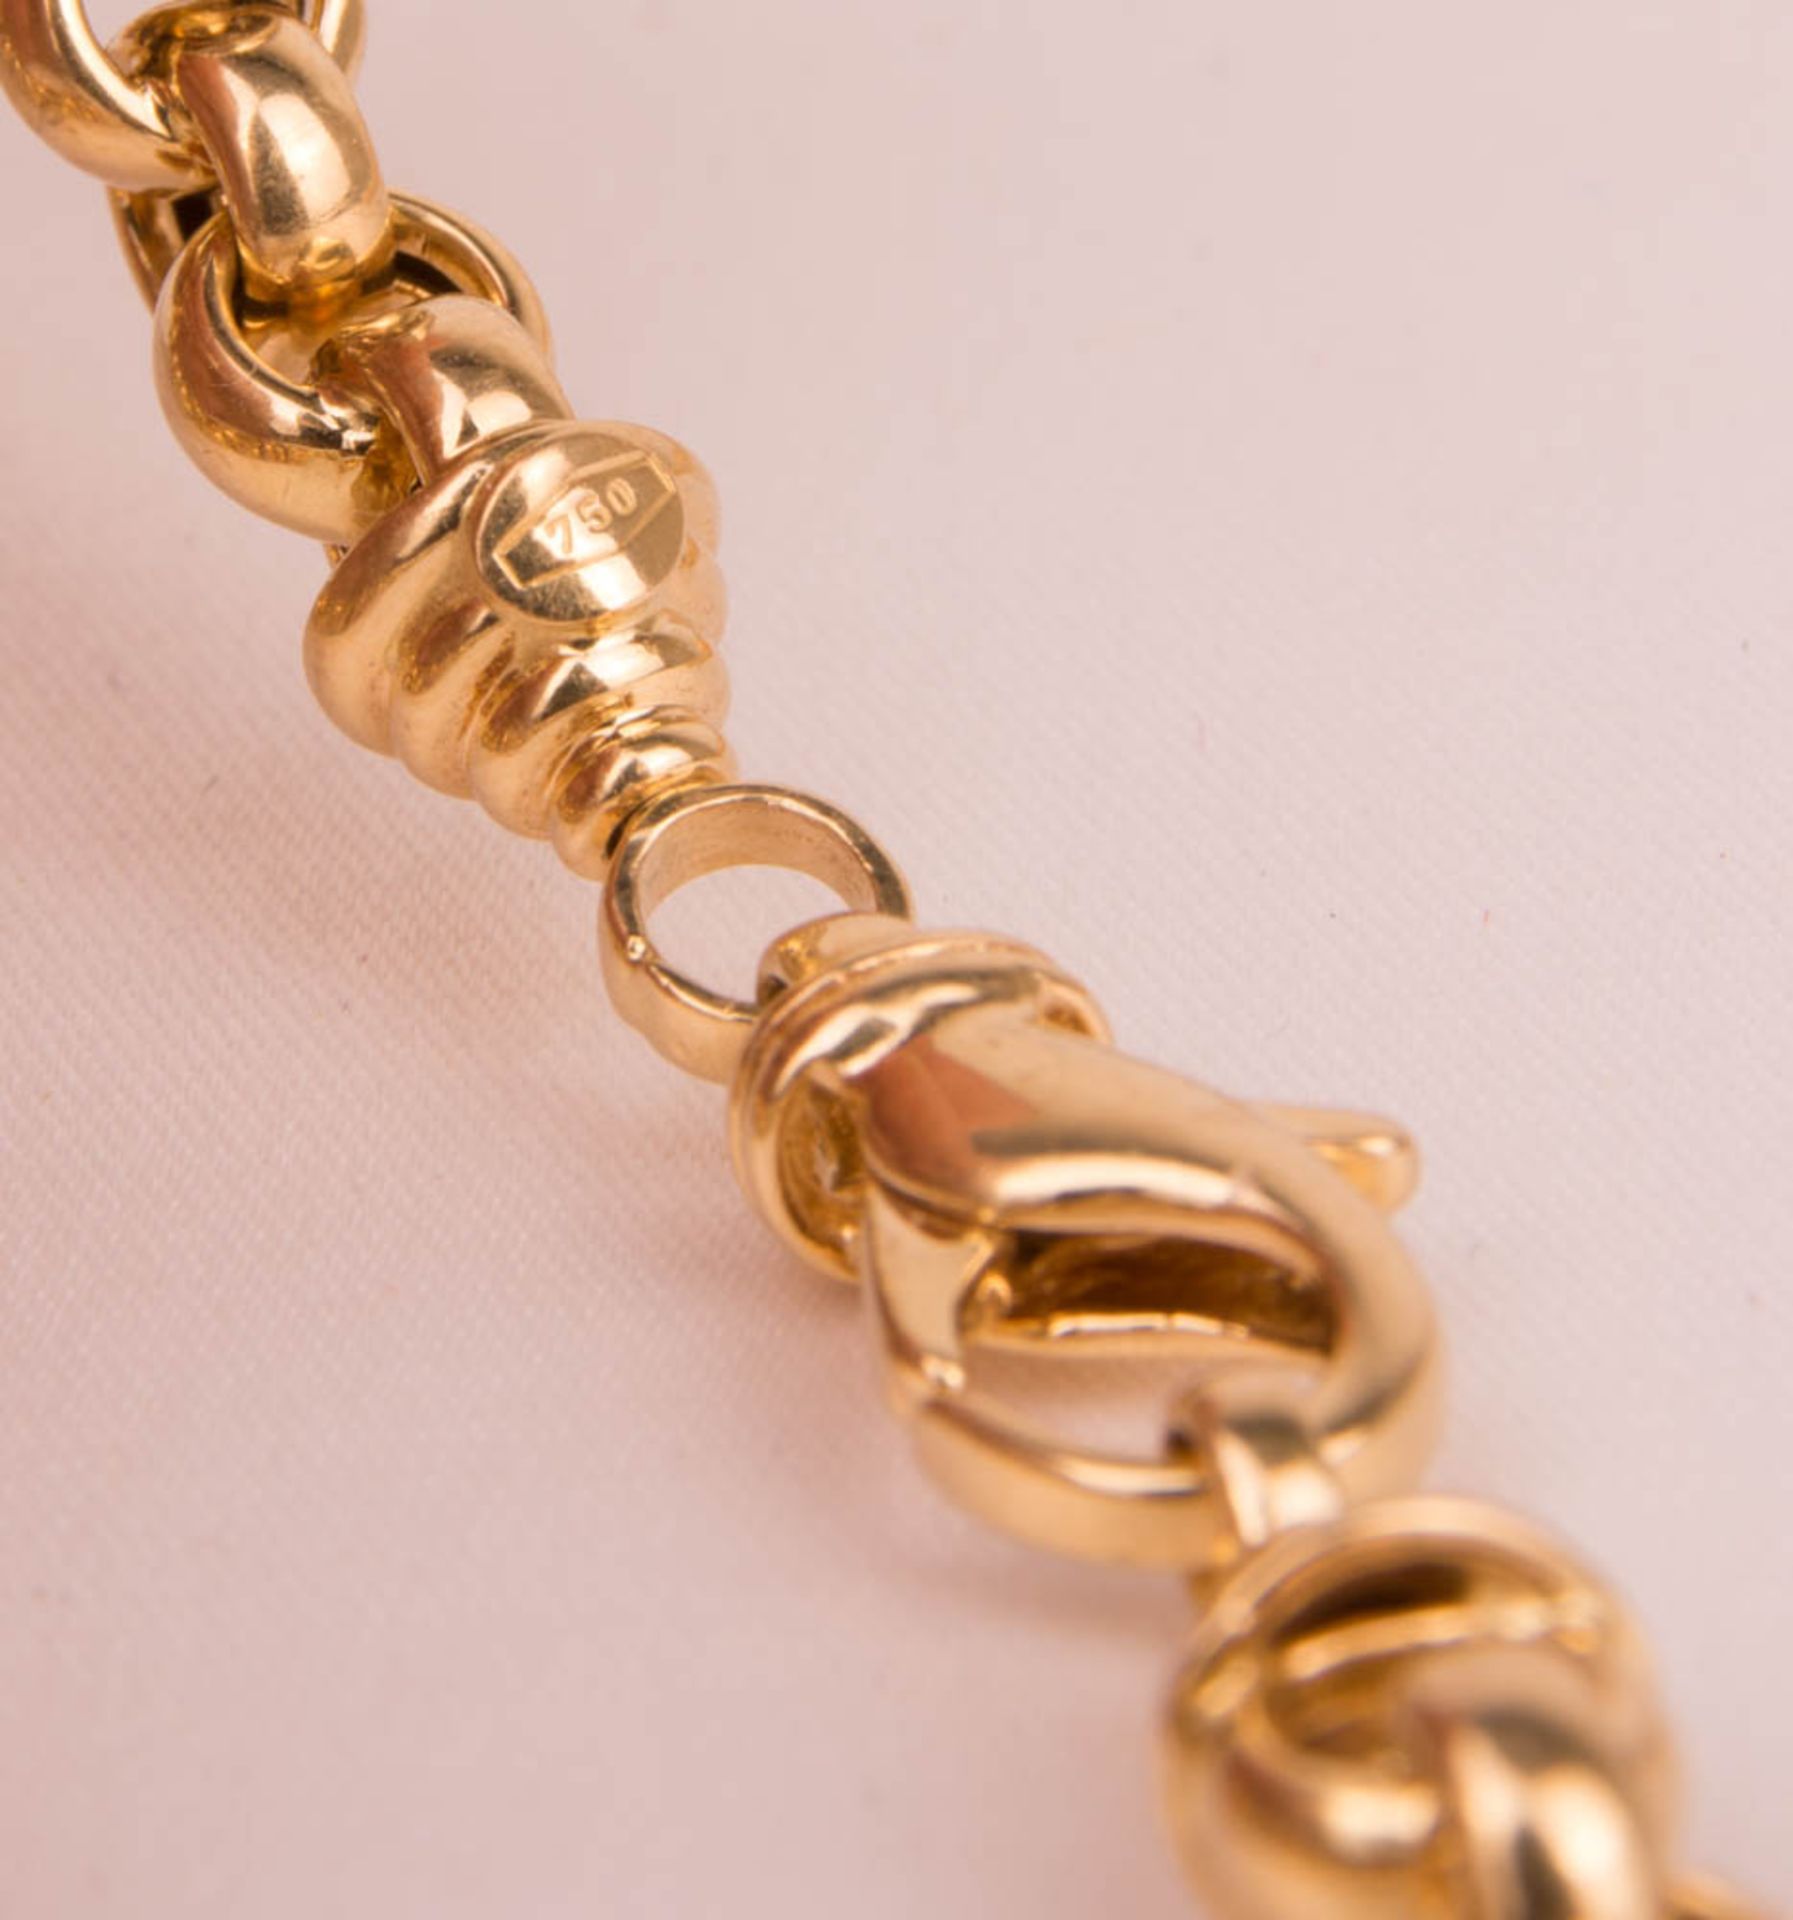 Necklace and matching bracelet, 750 yellow gold. - Image 3 of 4